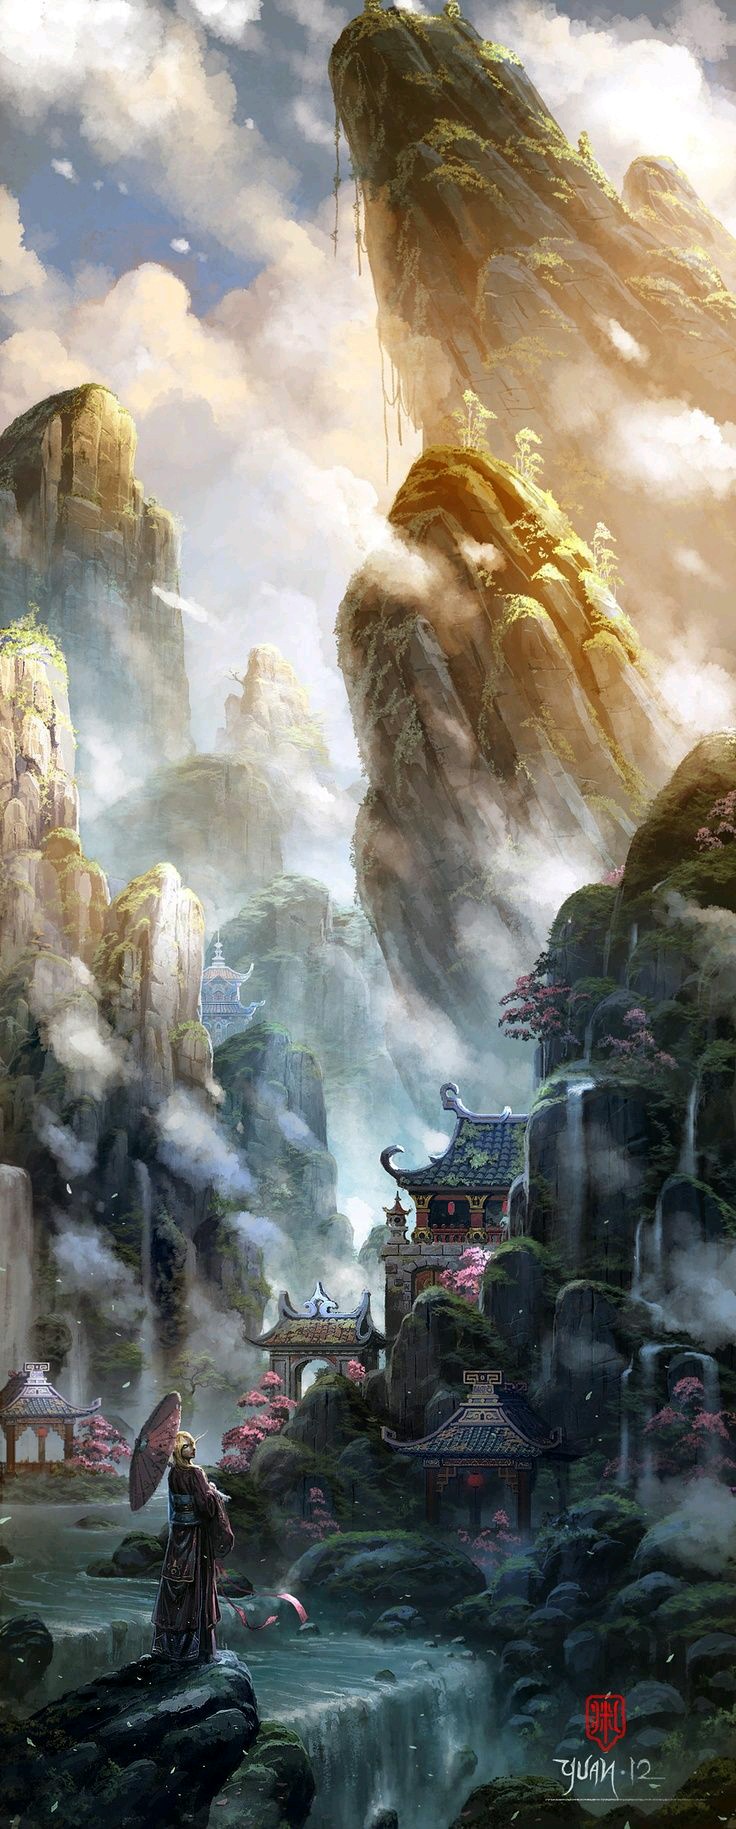 Fantasy Oriental Picture by ChaoyuanXu